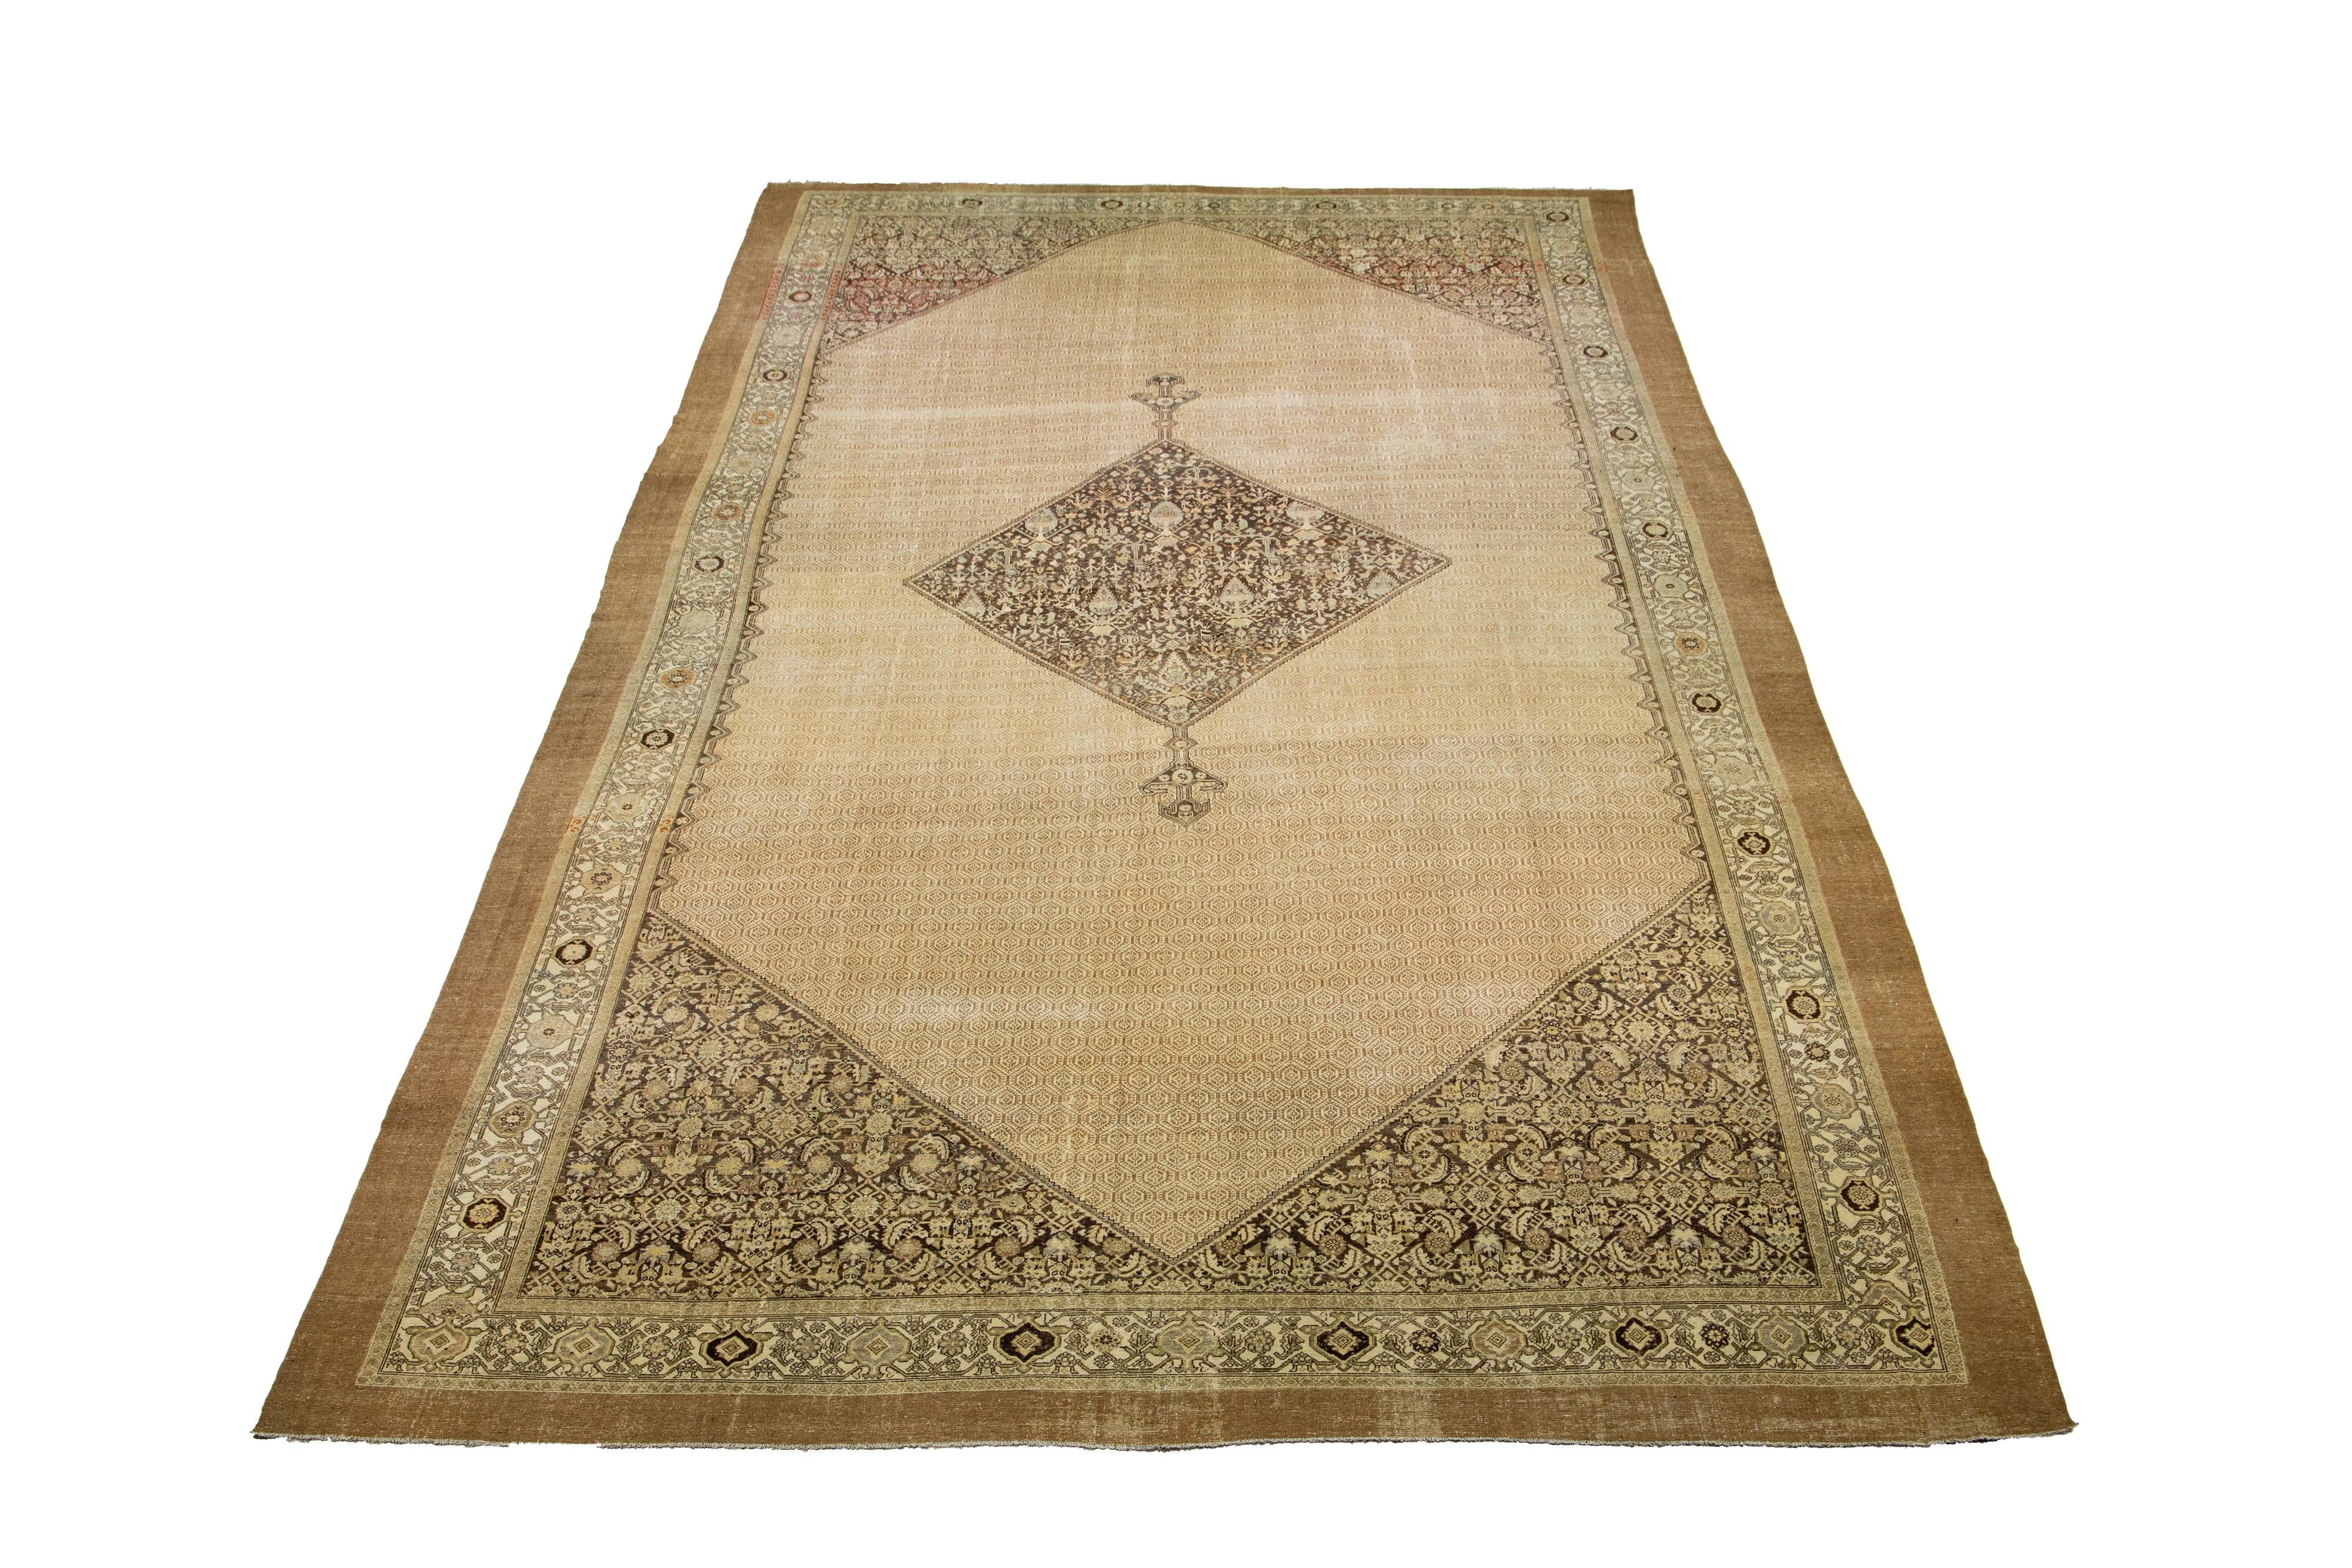 Beautiful antique Persian hand-knotted wool rug with a beige color field. This piece has brown and blue accents in a gorgeous medallion design.

This rug measures 14'3